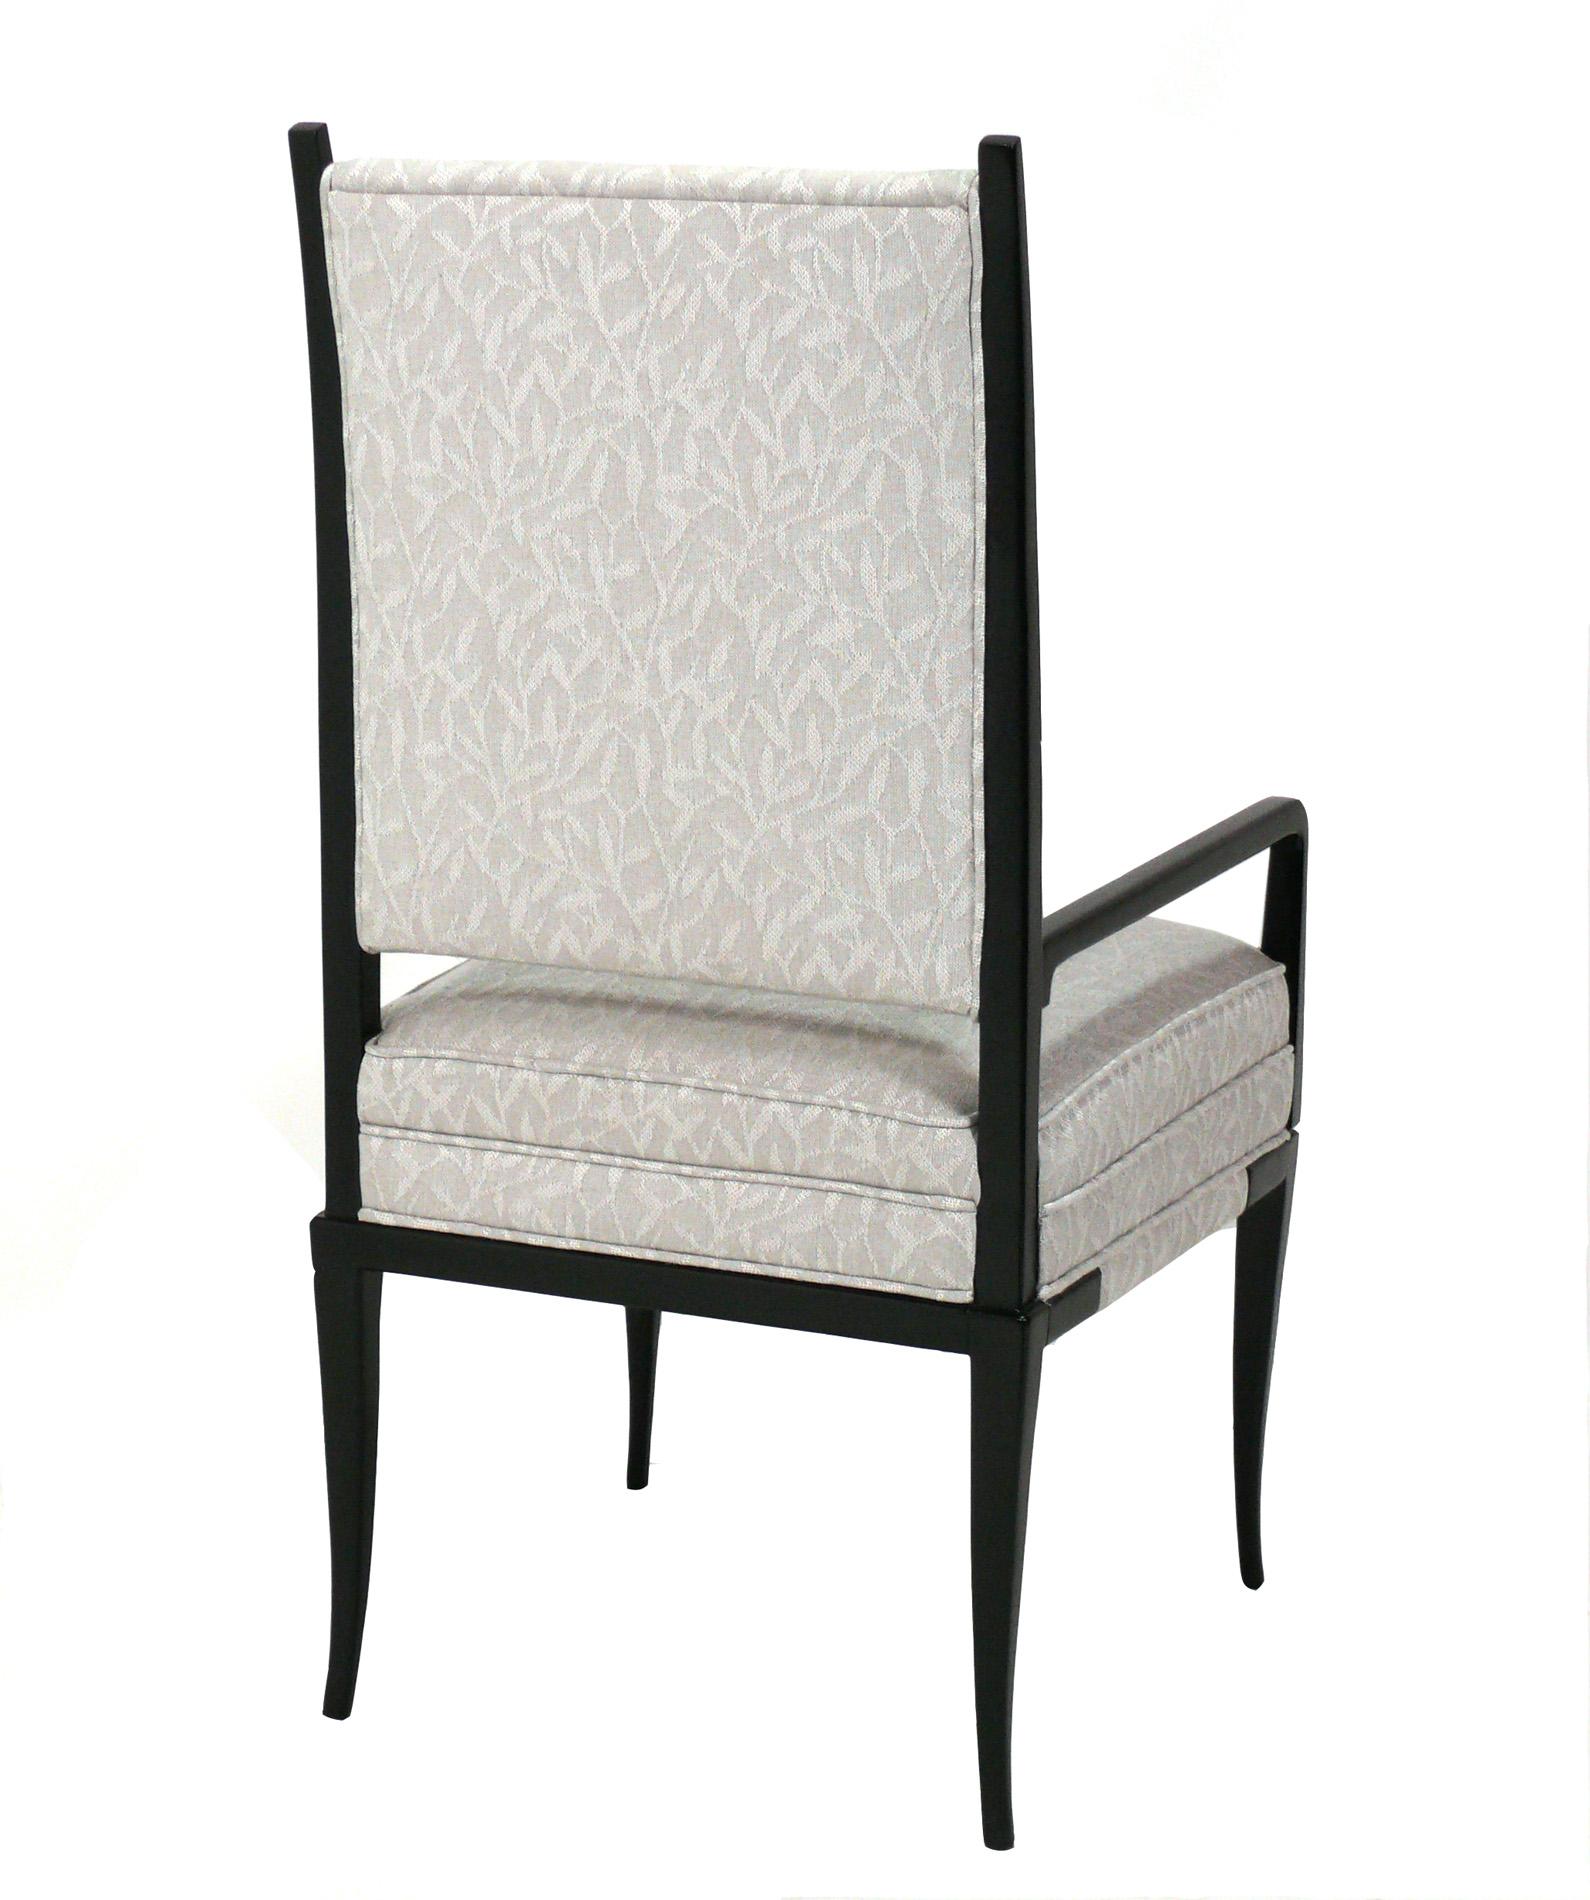 Mid-20th Century Tommi Parzinger Dining Chairs 2 Arm Chairs 6 Side Chairs For Sale